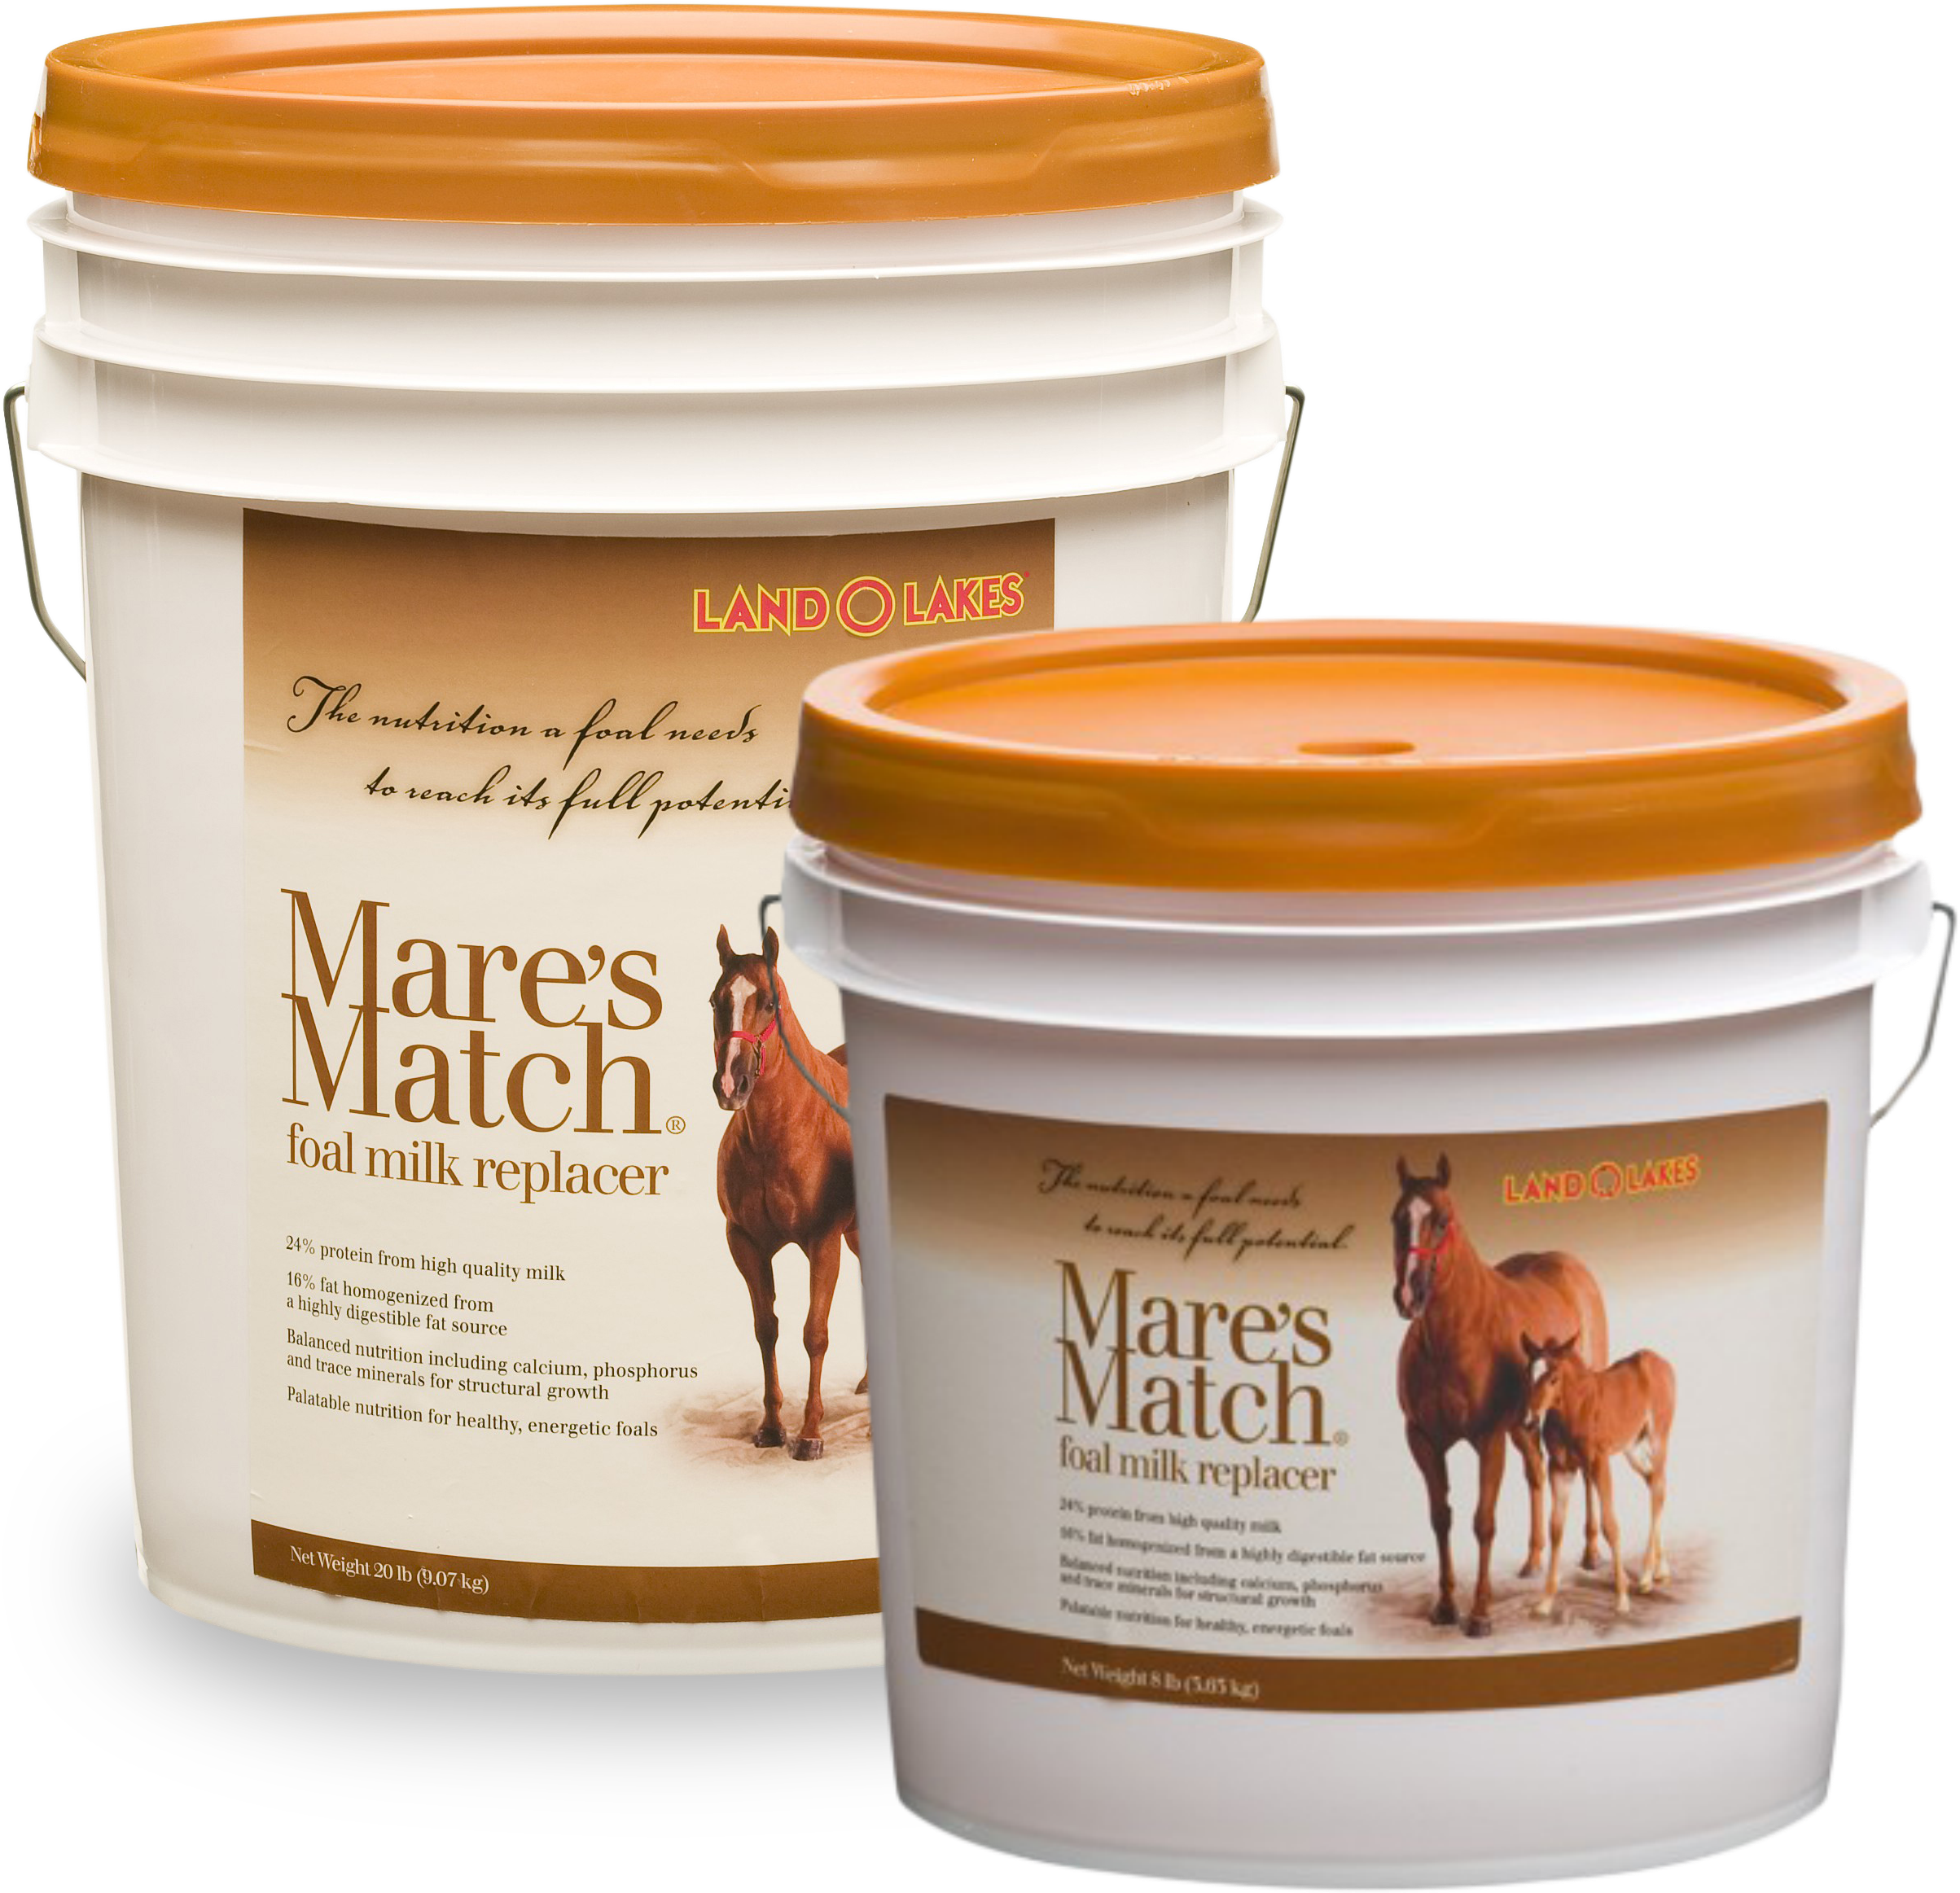 Land O'lakes Mares Match Foal Milk Replacer, 8 Lb. (2475x2404), Png Download